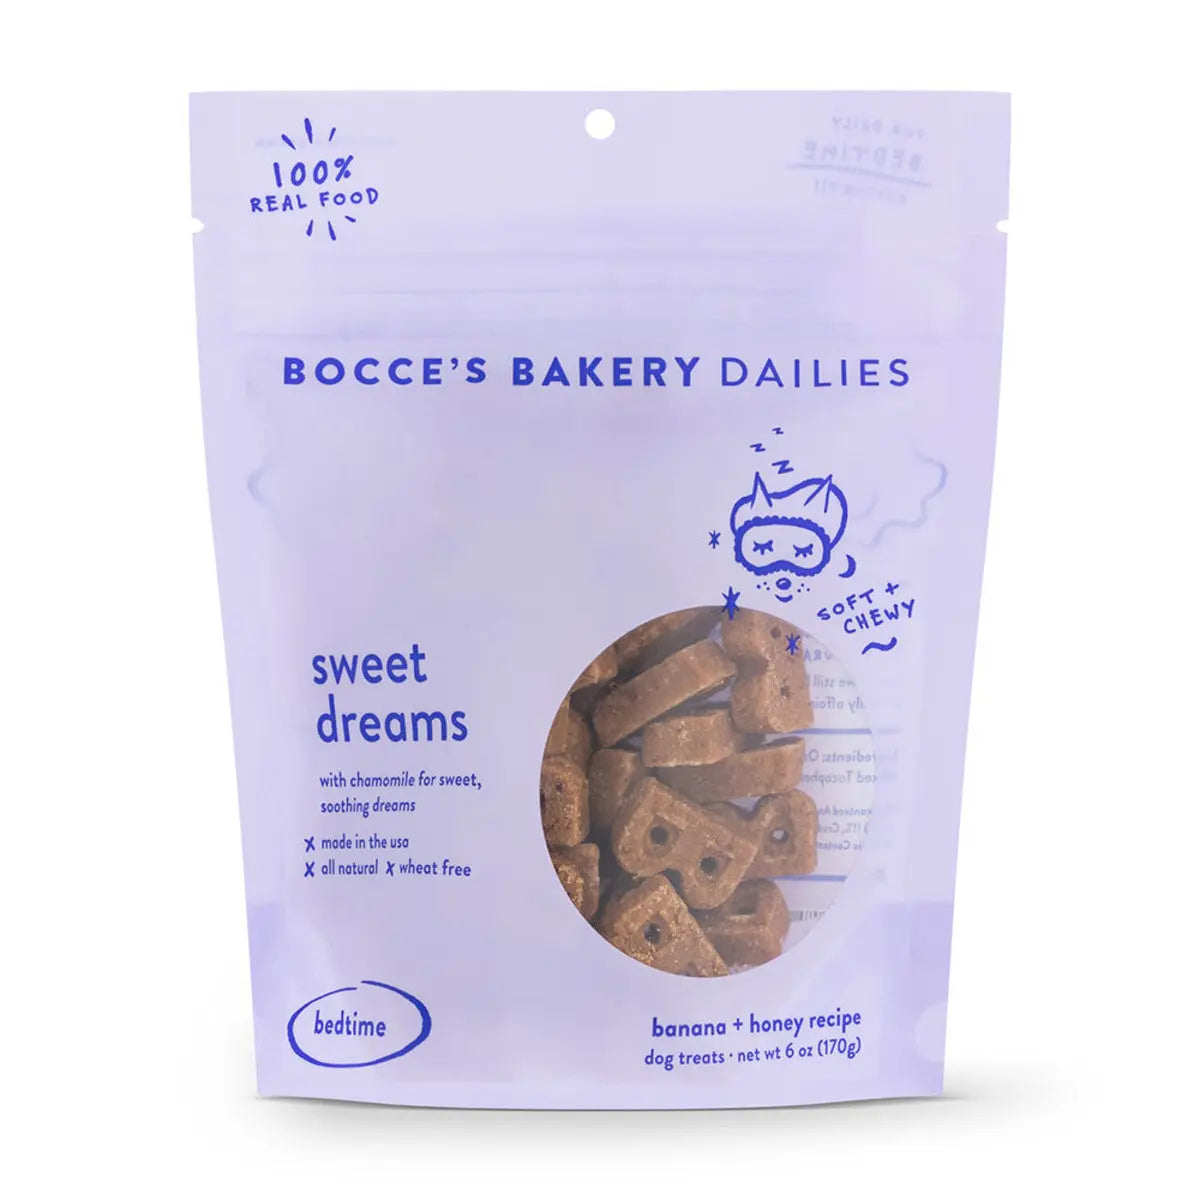 Bocce's Bakery Dailies Sweet Dreams 6oz Soft & Chewy Dog Treats Bocce's Bakery